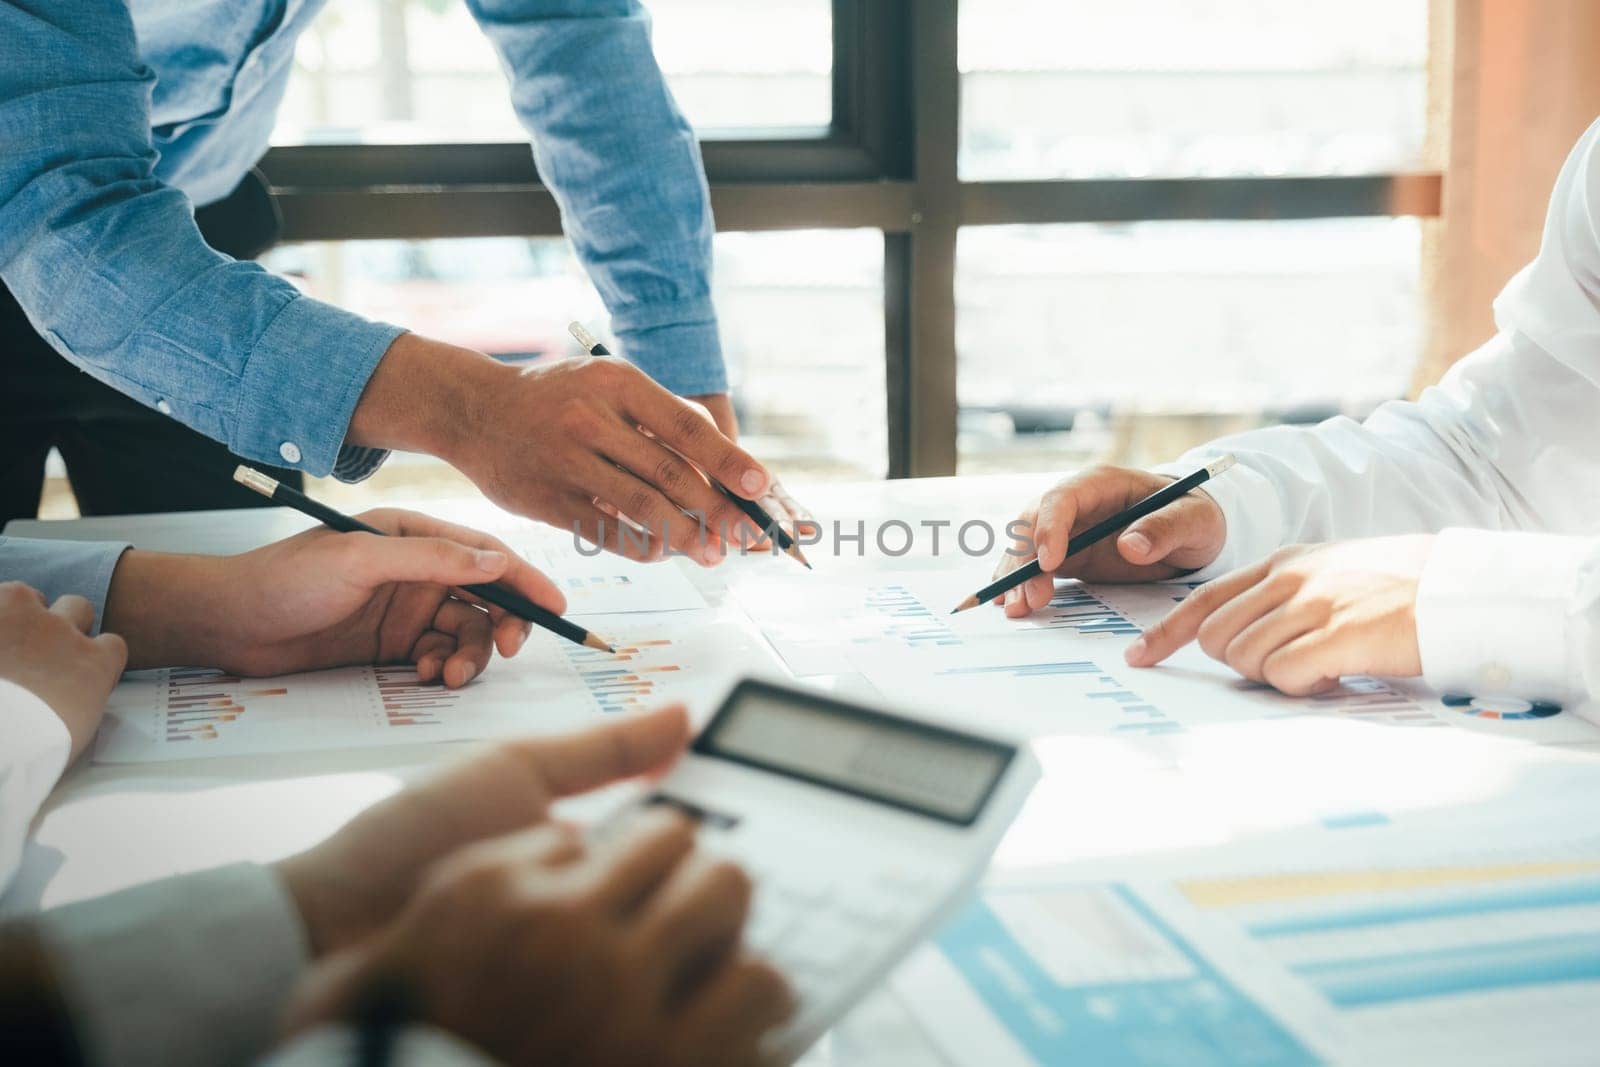 Close-up of businessmen working together at workplace, discussing about strategies, plans, analytic progress, and financial stats, and pointing at graph documents on desk holding pencils and calculator. Business and Teamwork concept.